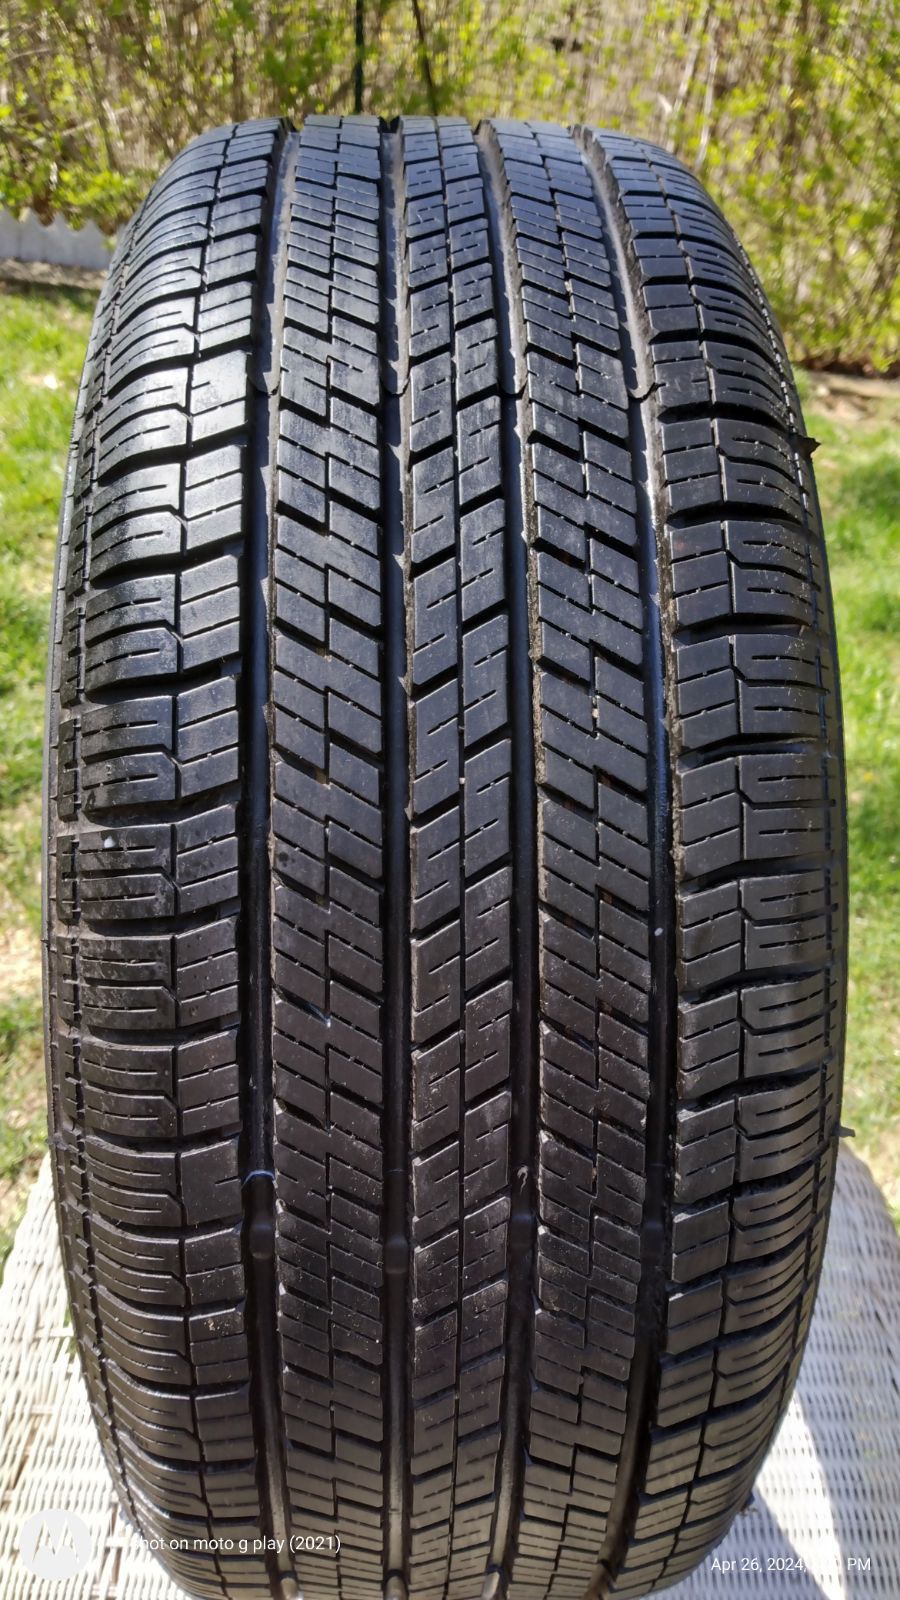 16" Tire 4 sale:
New Continental Touring Radial Tire size 215/55 16" .  Traded in car and have no use, $60